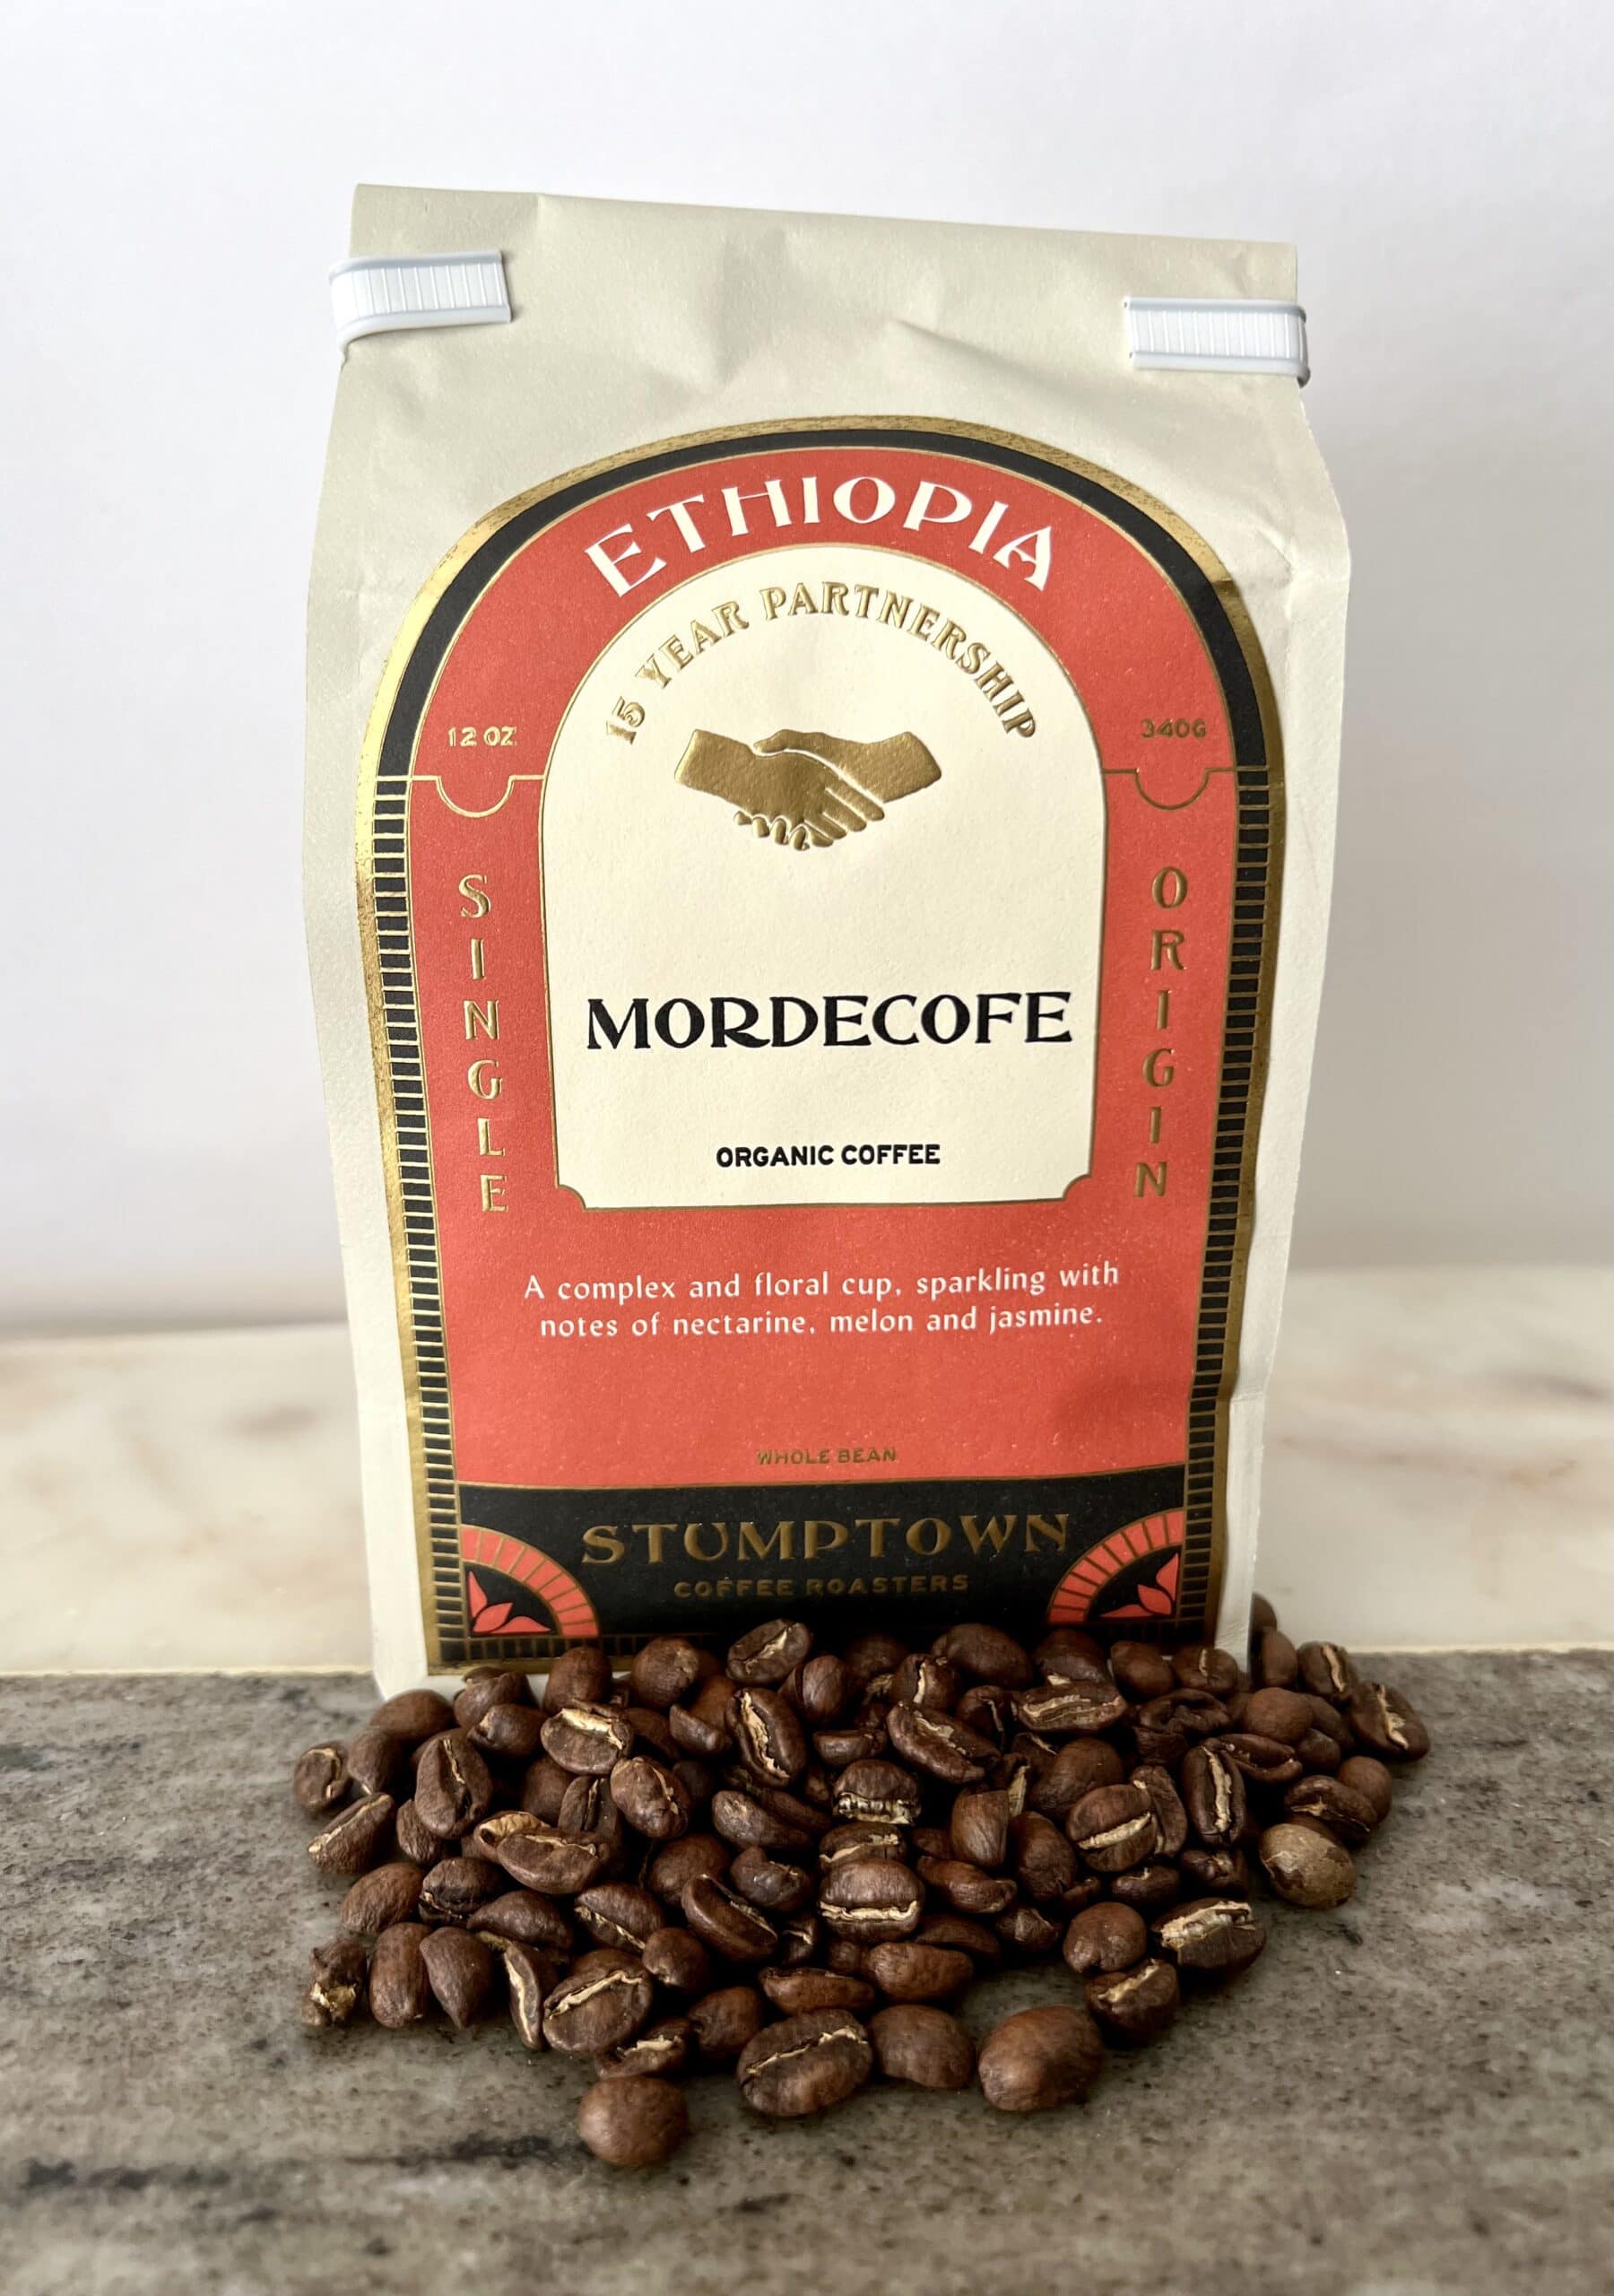 Ethiopia Mordecofe coffee packaging stands on coffee beans